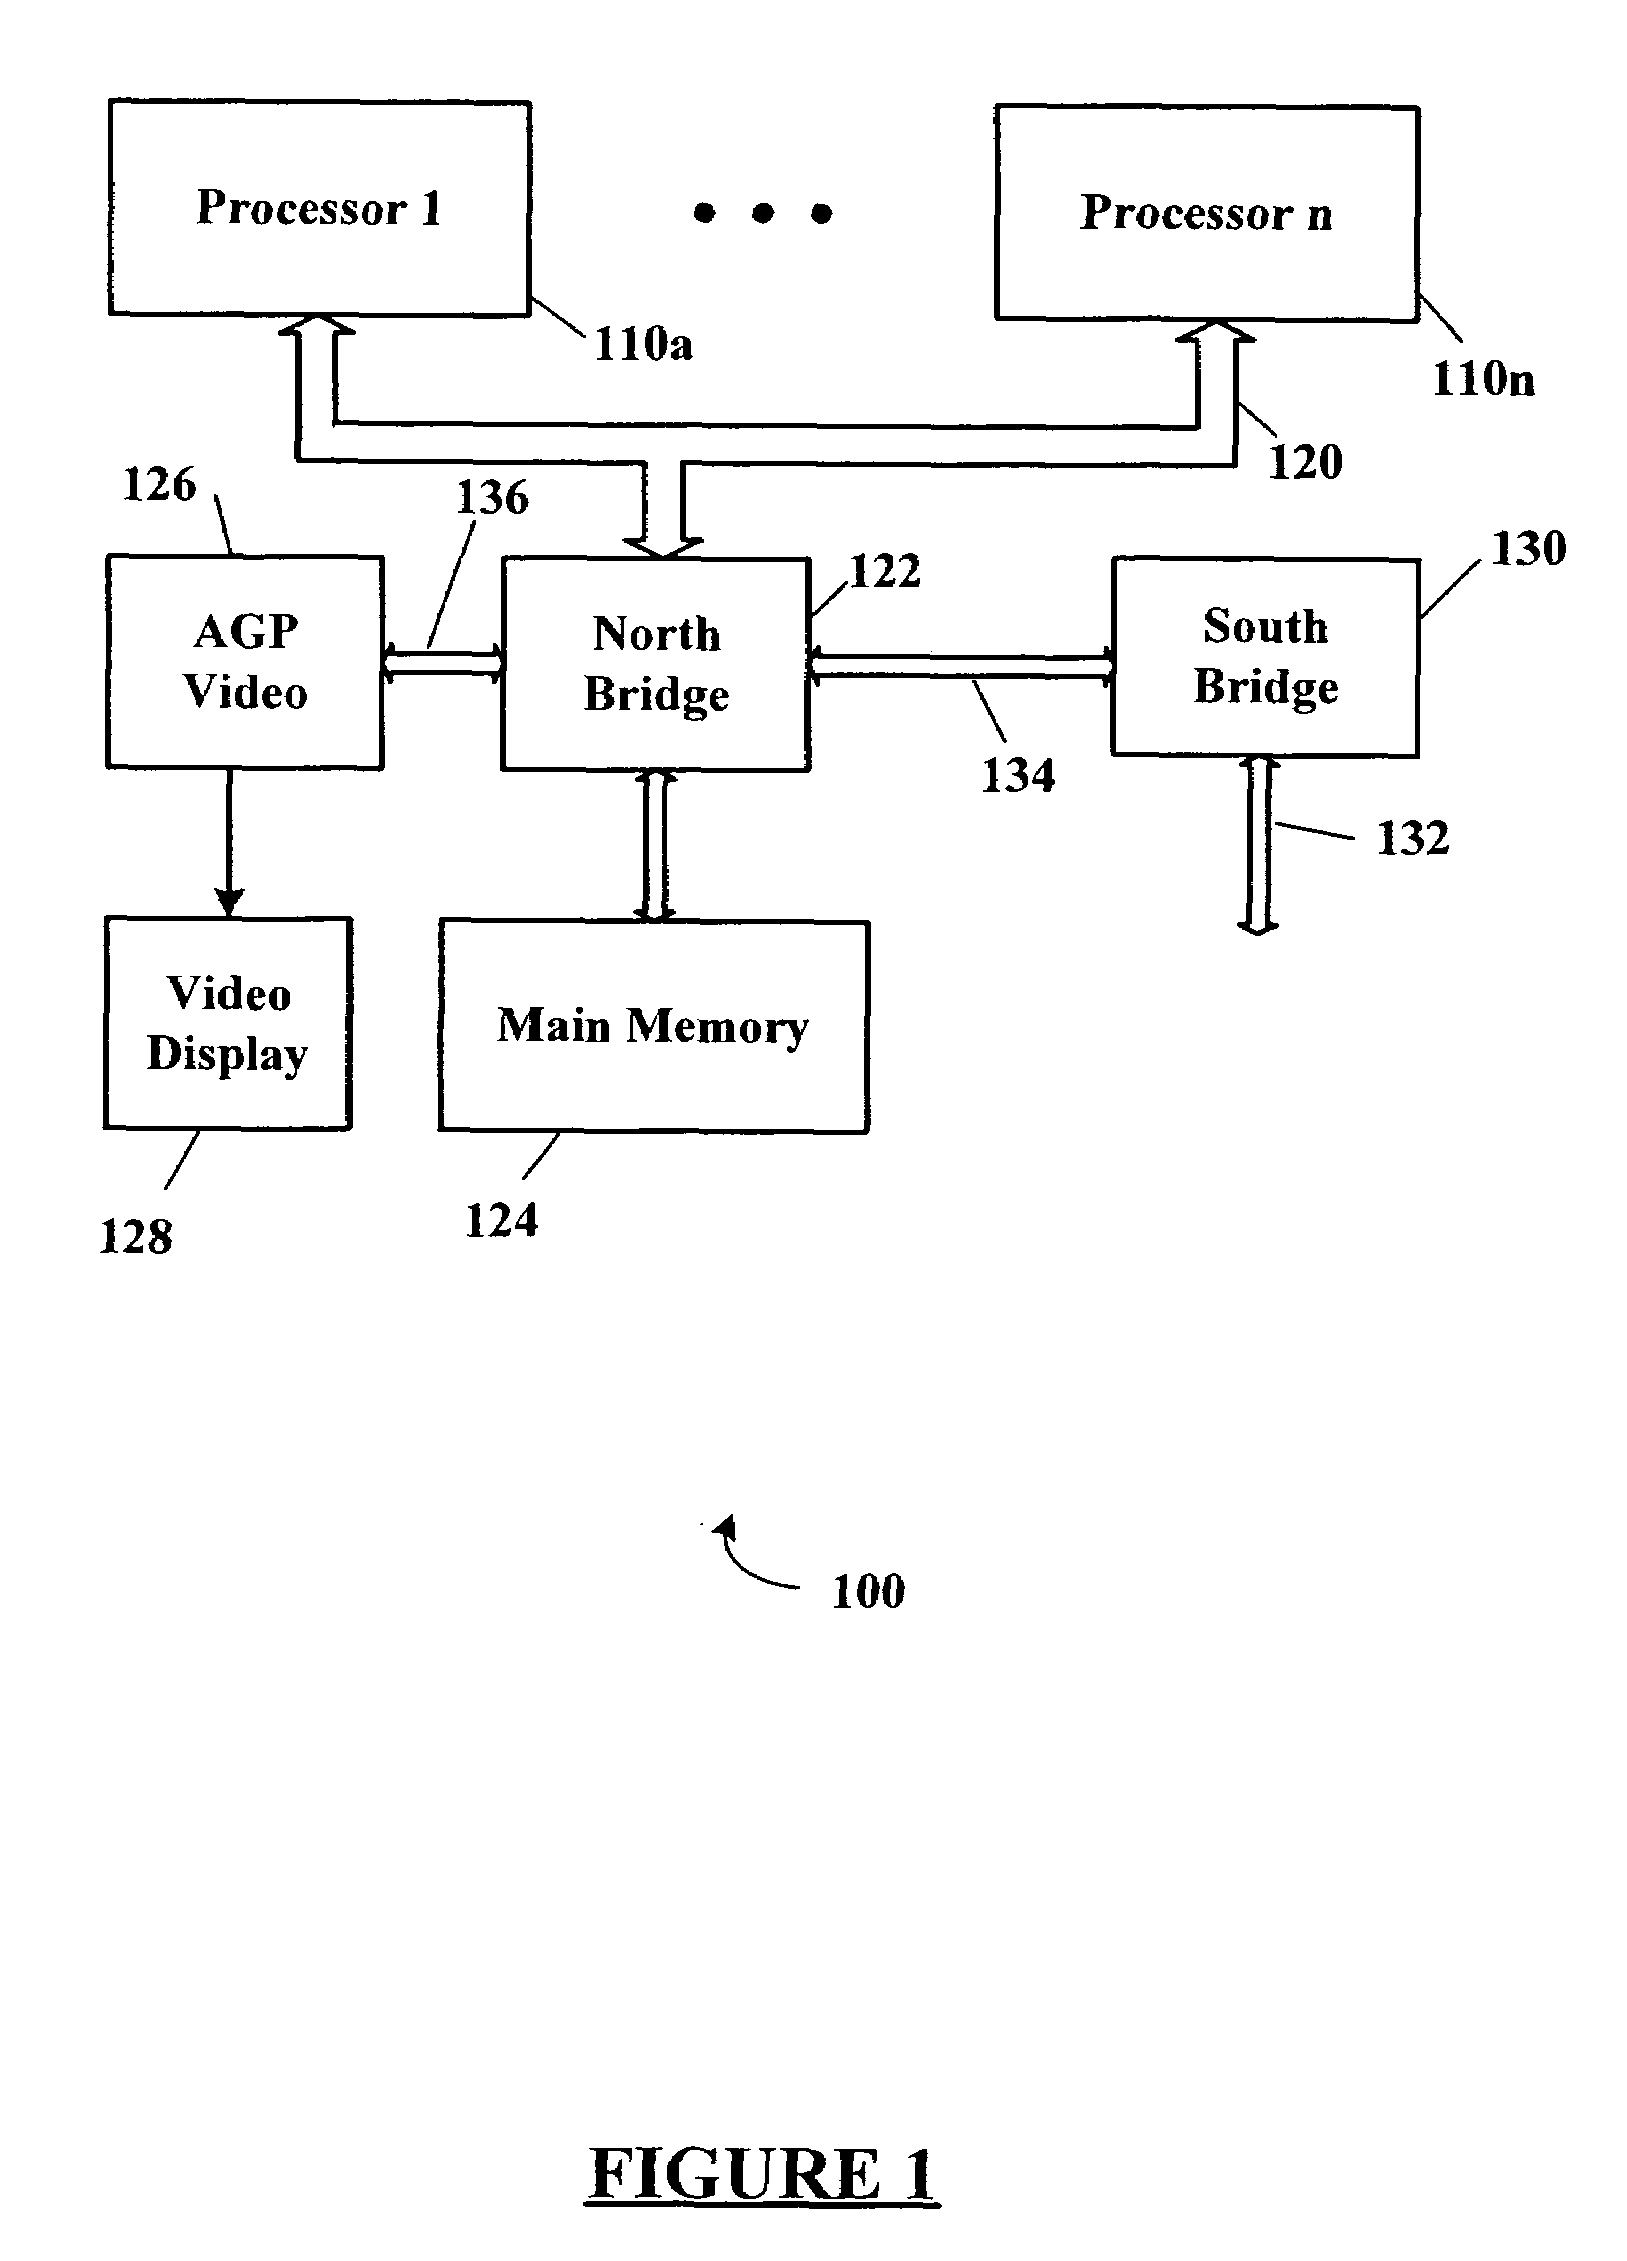 Fault resilient boot method for multi-rail processors in a computer system by disabling processor with the failed voltage regulator to control rebooting of the processors